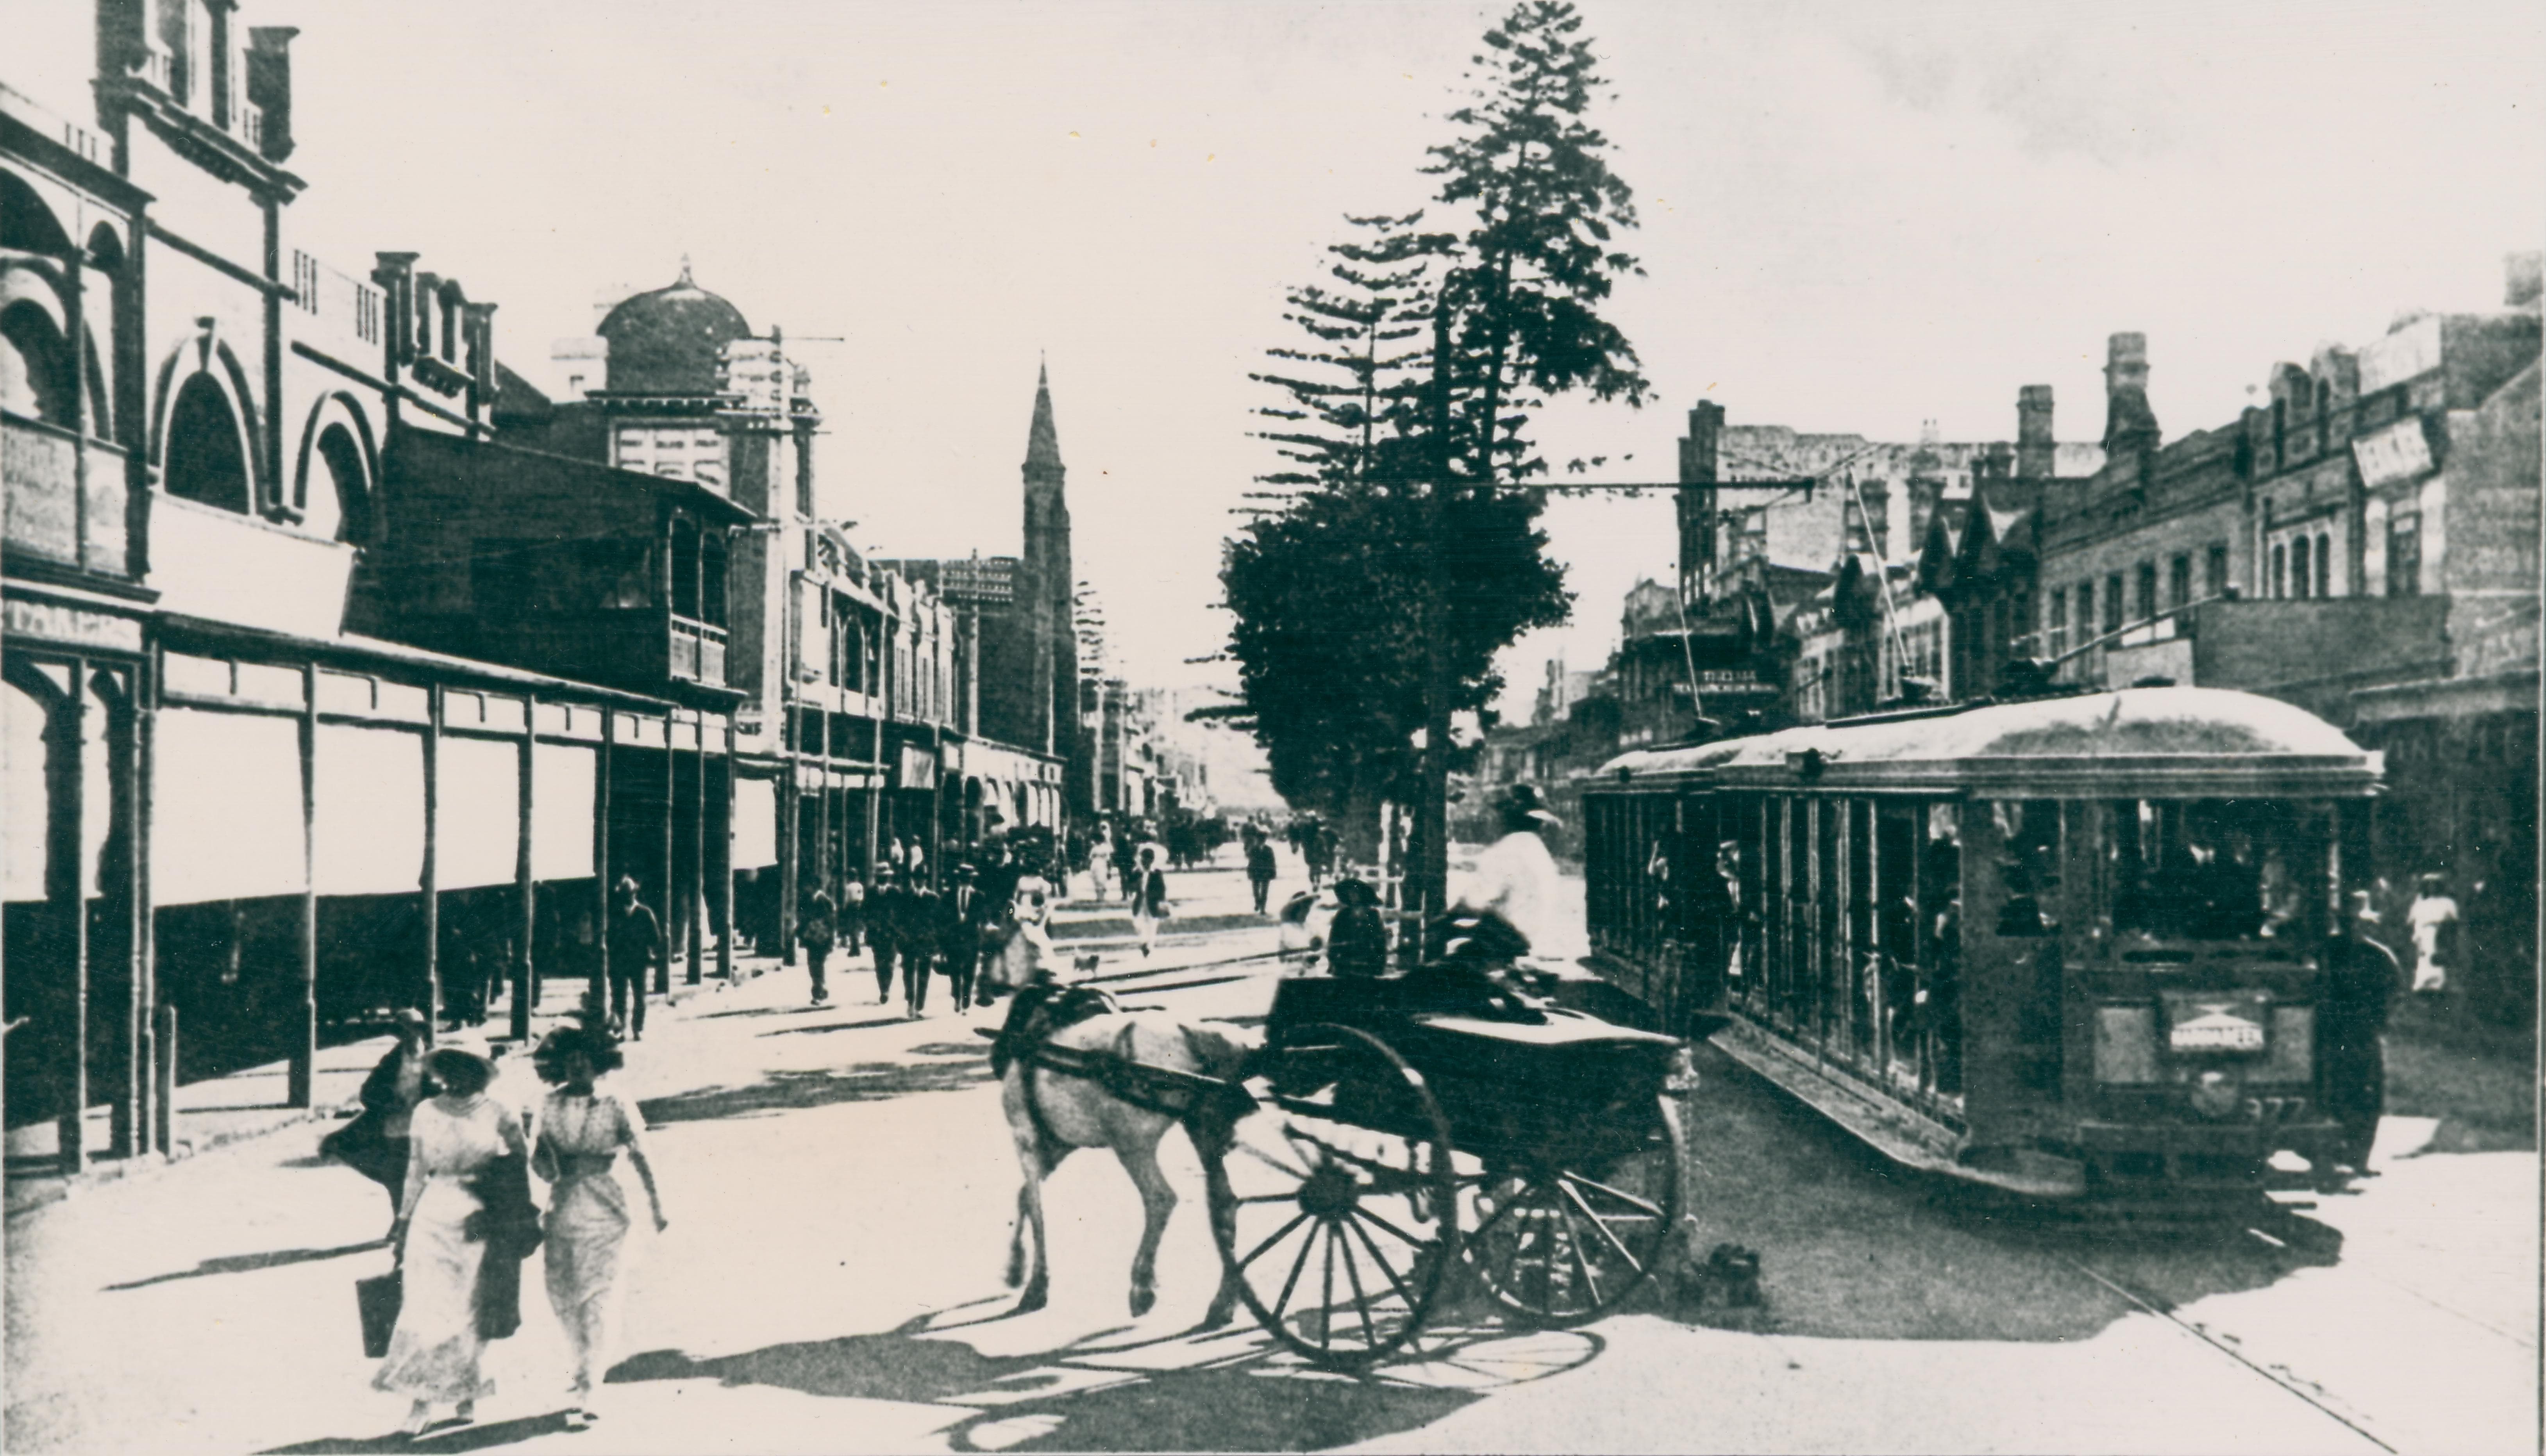 Manly_Corso_and_Tram_c1912.jpg